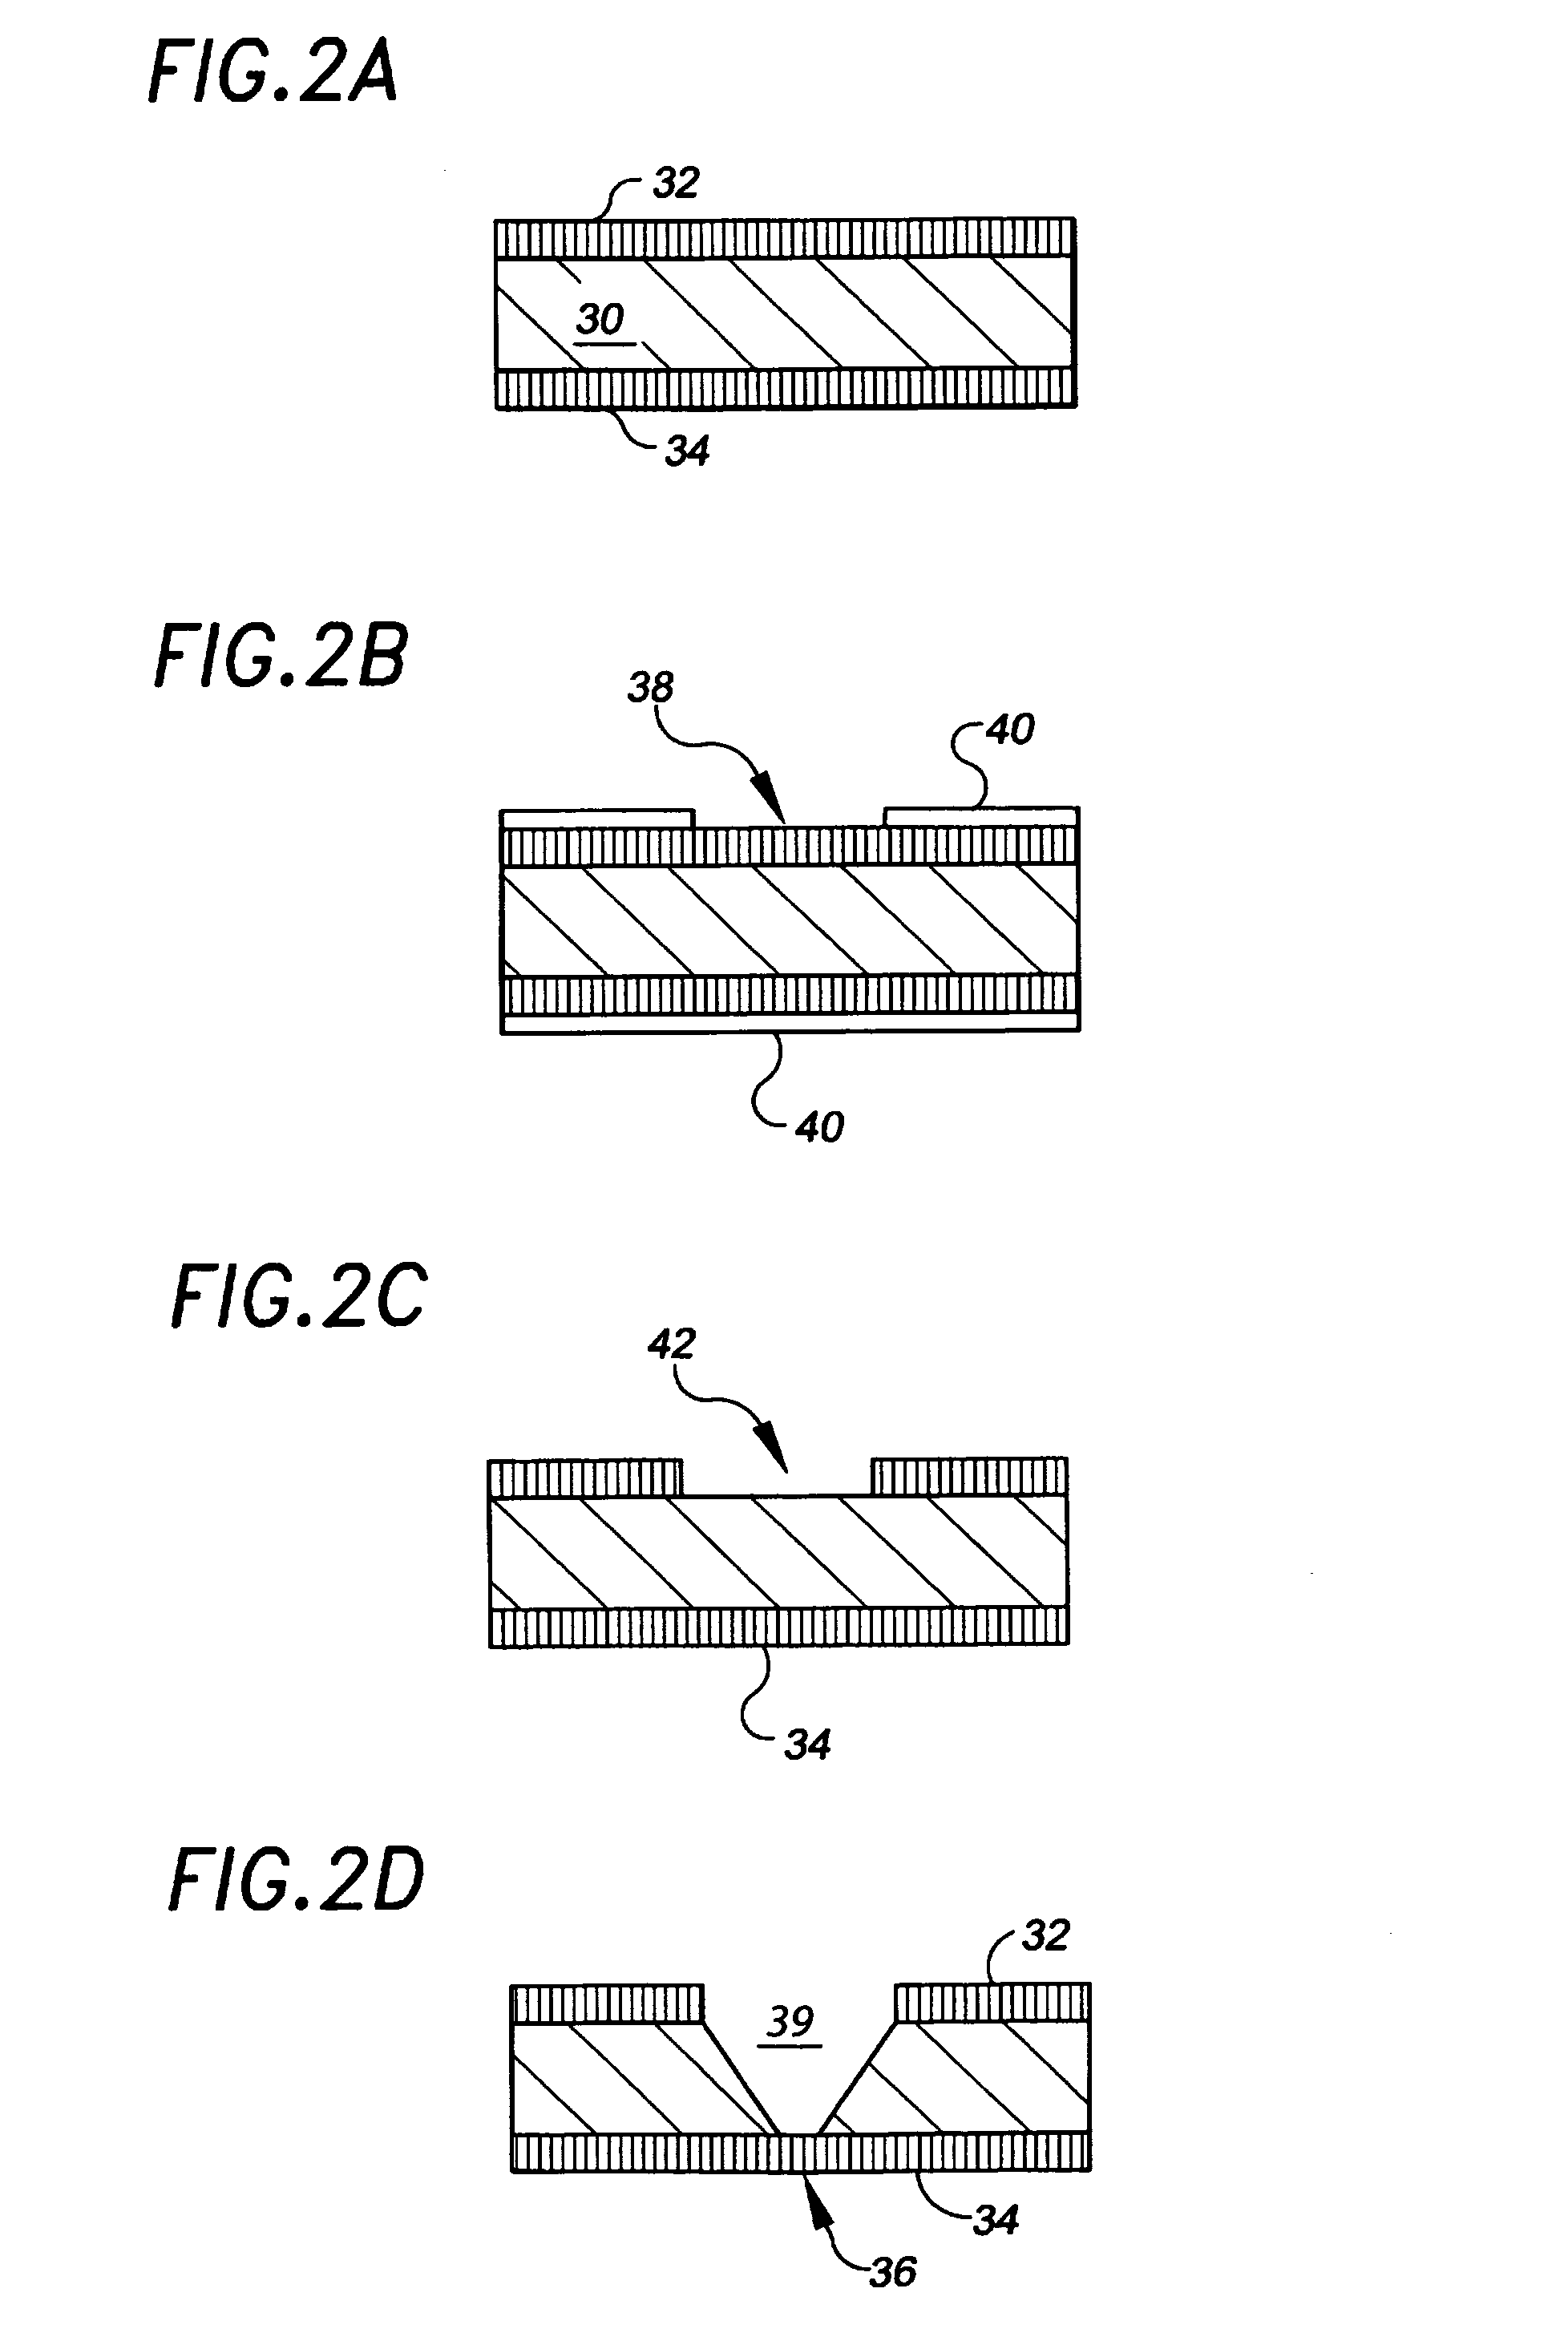 Material deposition techniques for control of solid state aperture surface properties